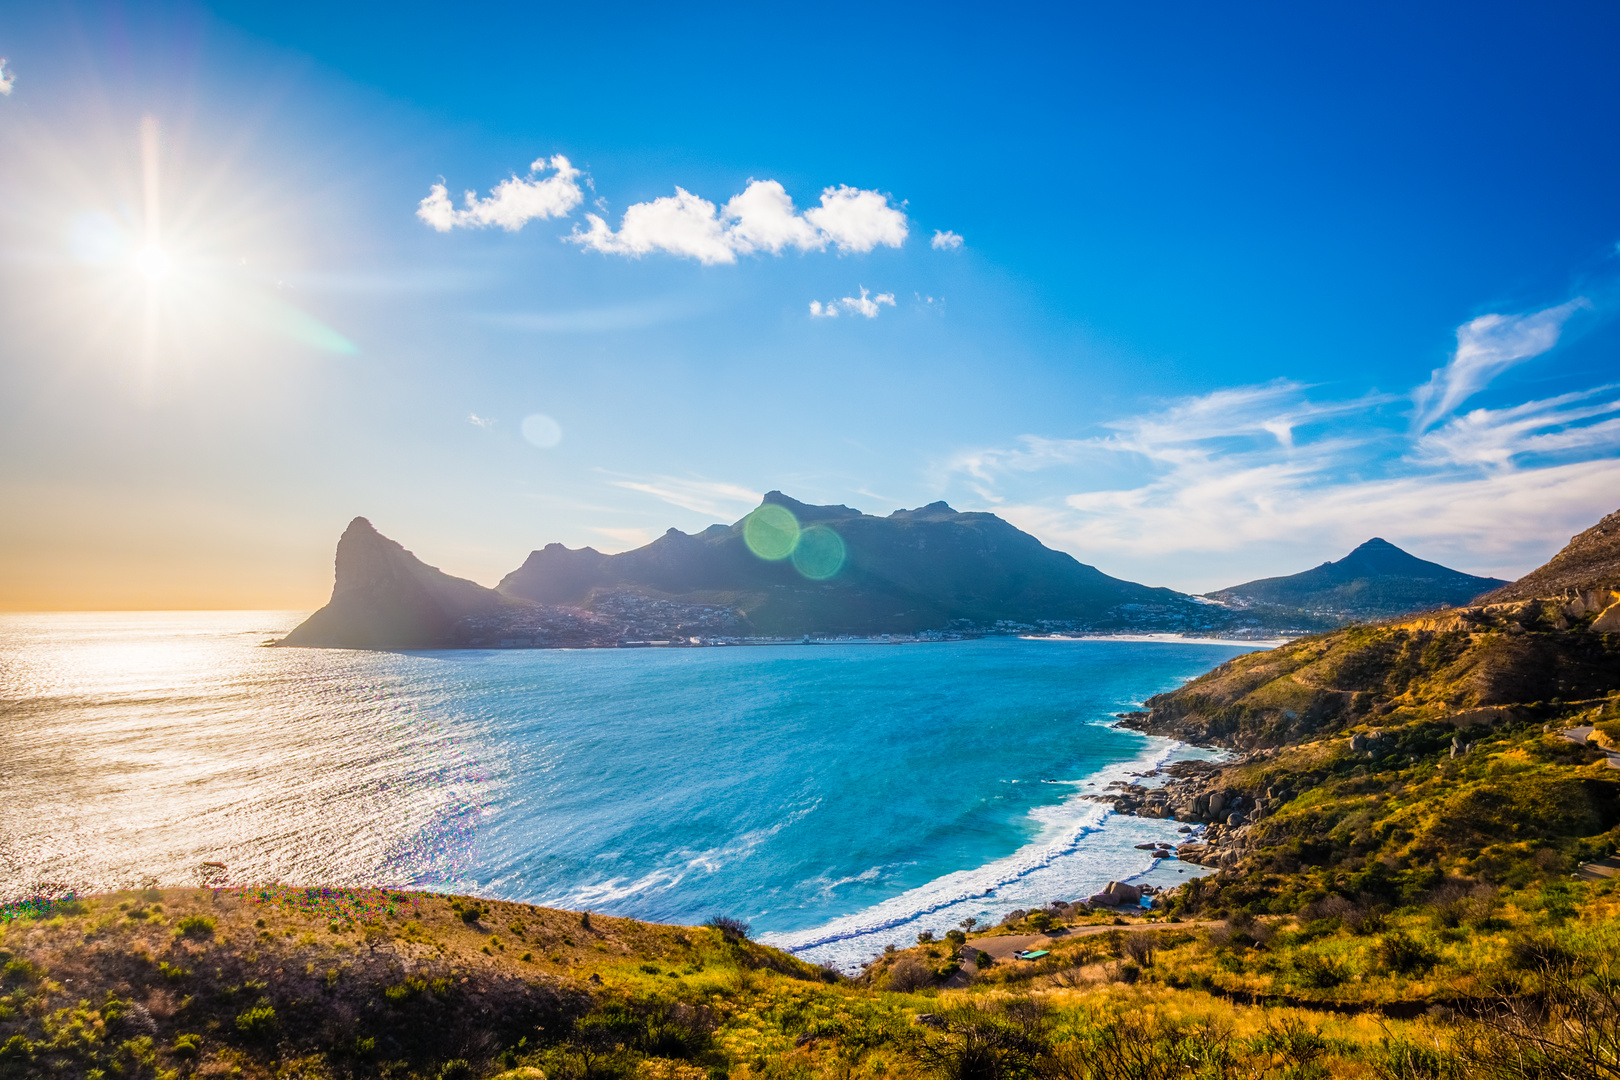 Hout Bay - South Africa